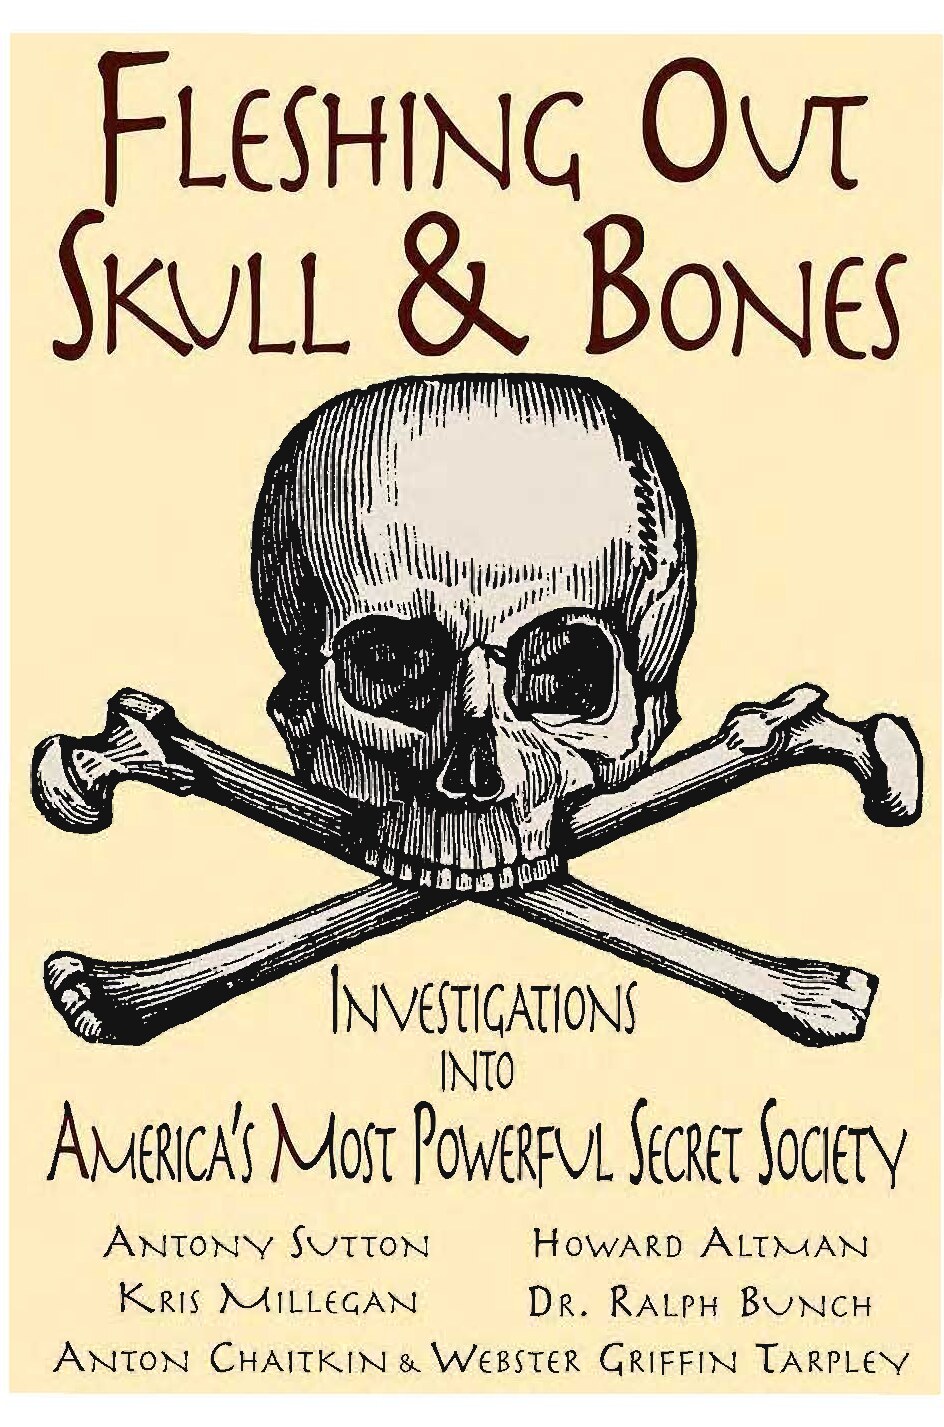 Sutton, Anthony C.; Fleshing Out Skull and Bones